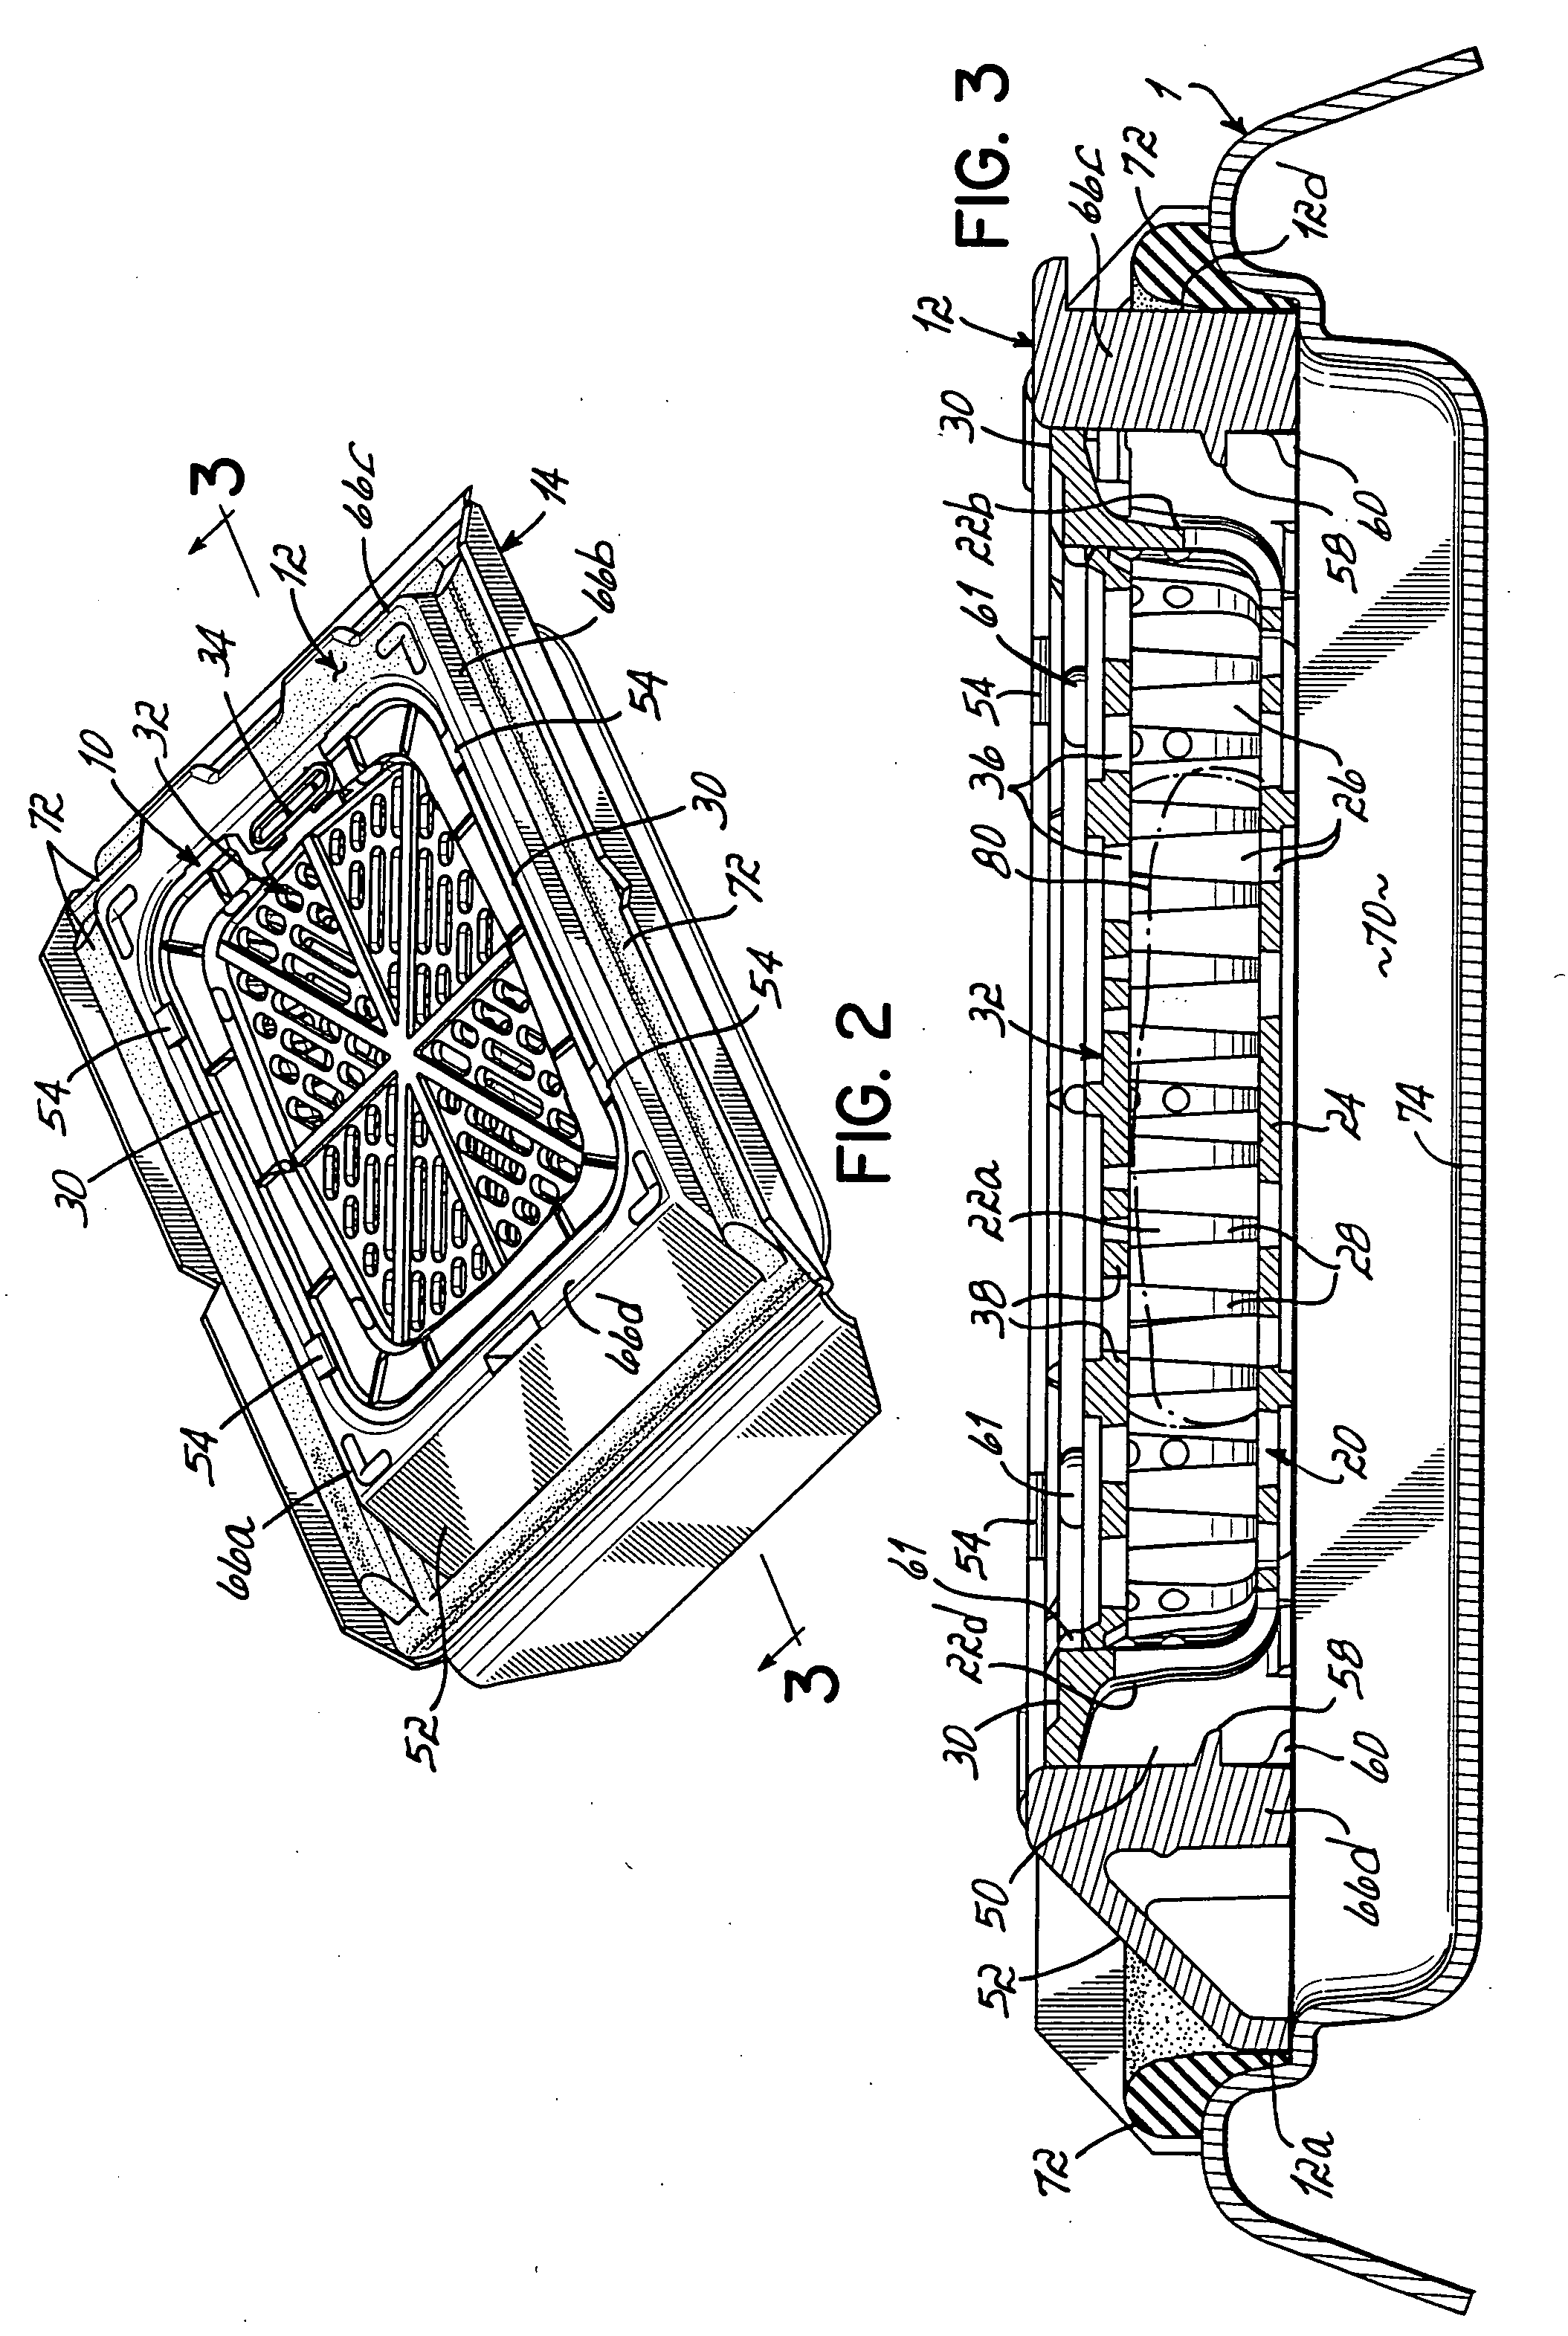 Cassette and embedding assembly for handling and holding tissue samples during processing, embedding and microtome procedures, staging devices therefore, and methods therefor